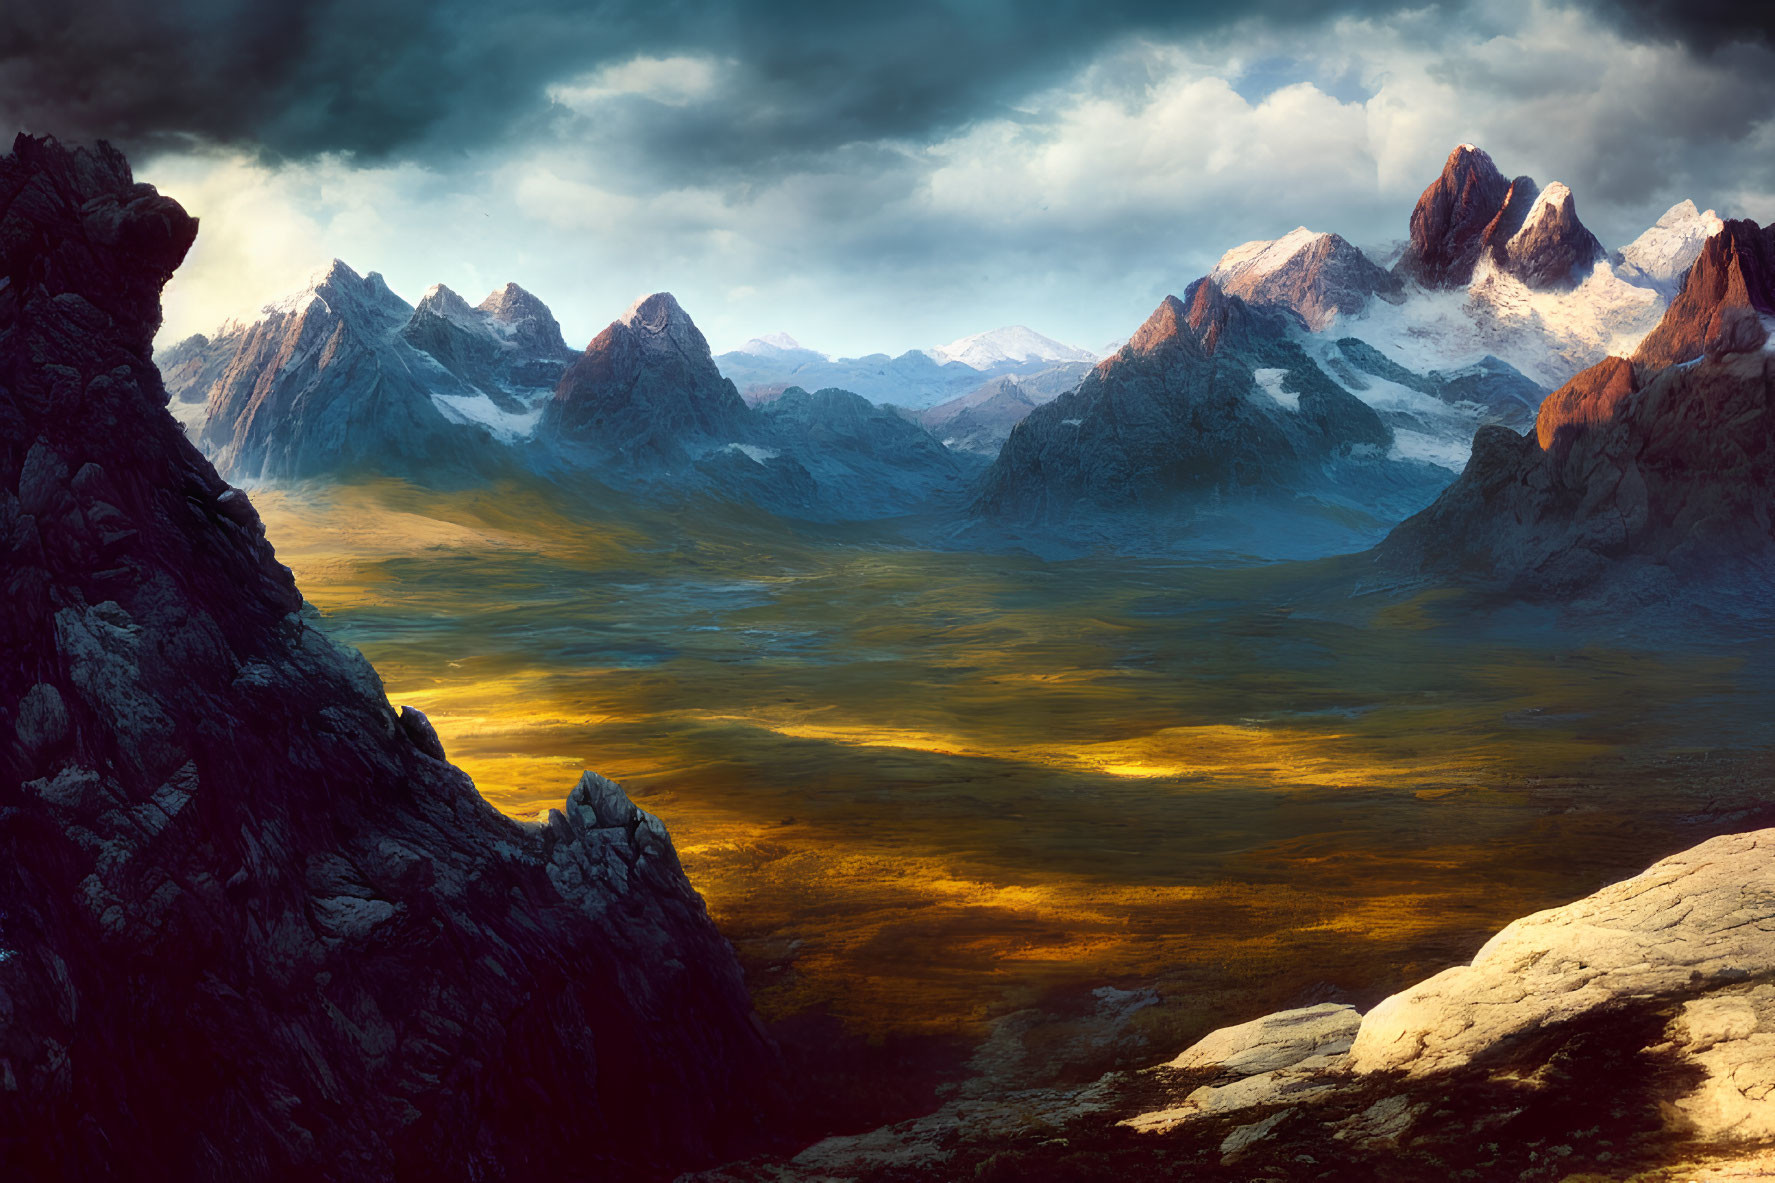 Panoramic landscape: rugged mountain peaks, dramatic cloudy sky, grassy valley in golden light